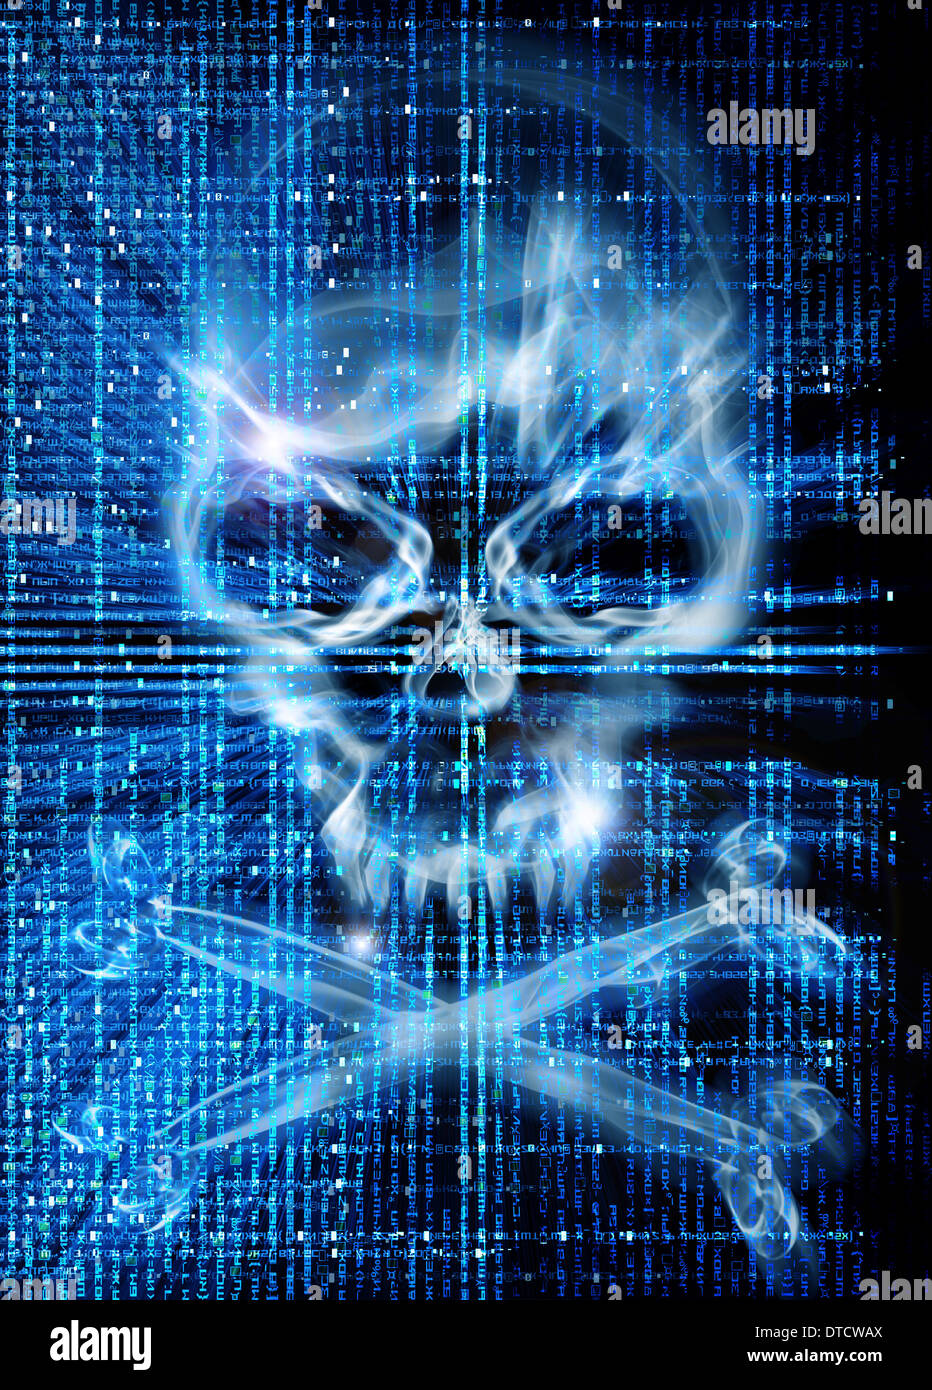 digital background with skull Stock Photo